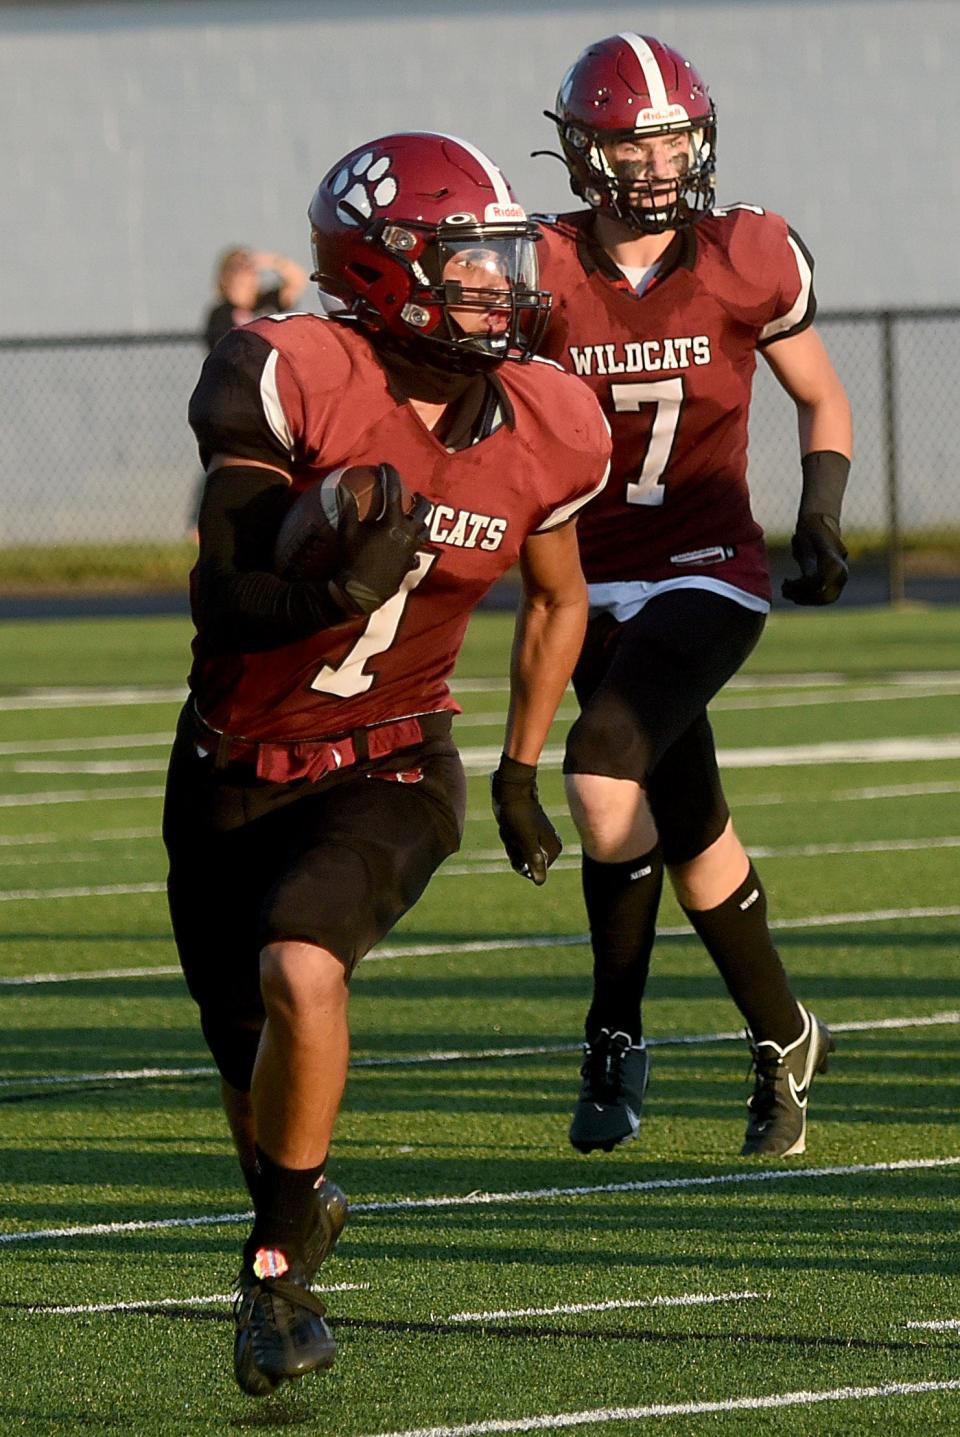 Newark junior Tee Davie (1) races to the outside with sophomore teammate Austin Rose (7) trailing during the Wildcats' season opener against Zanesville. Newark bounced back to beat Mount Vernon 35-34 in Week 2, the program's first victory since 2019.